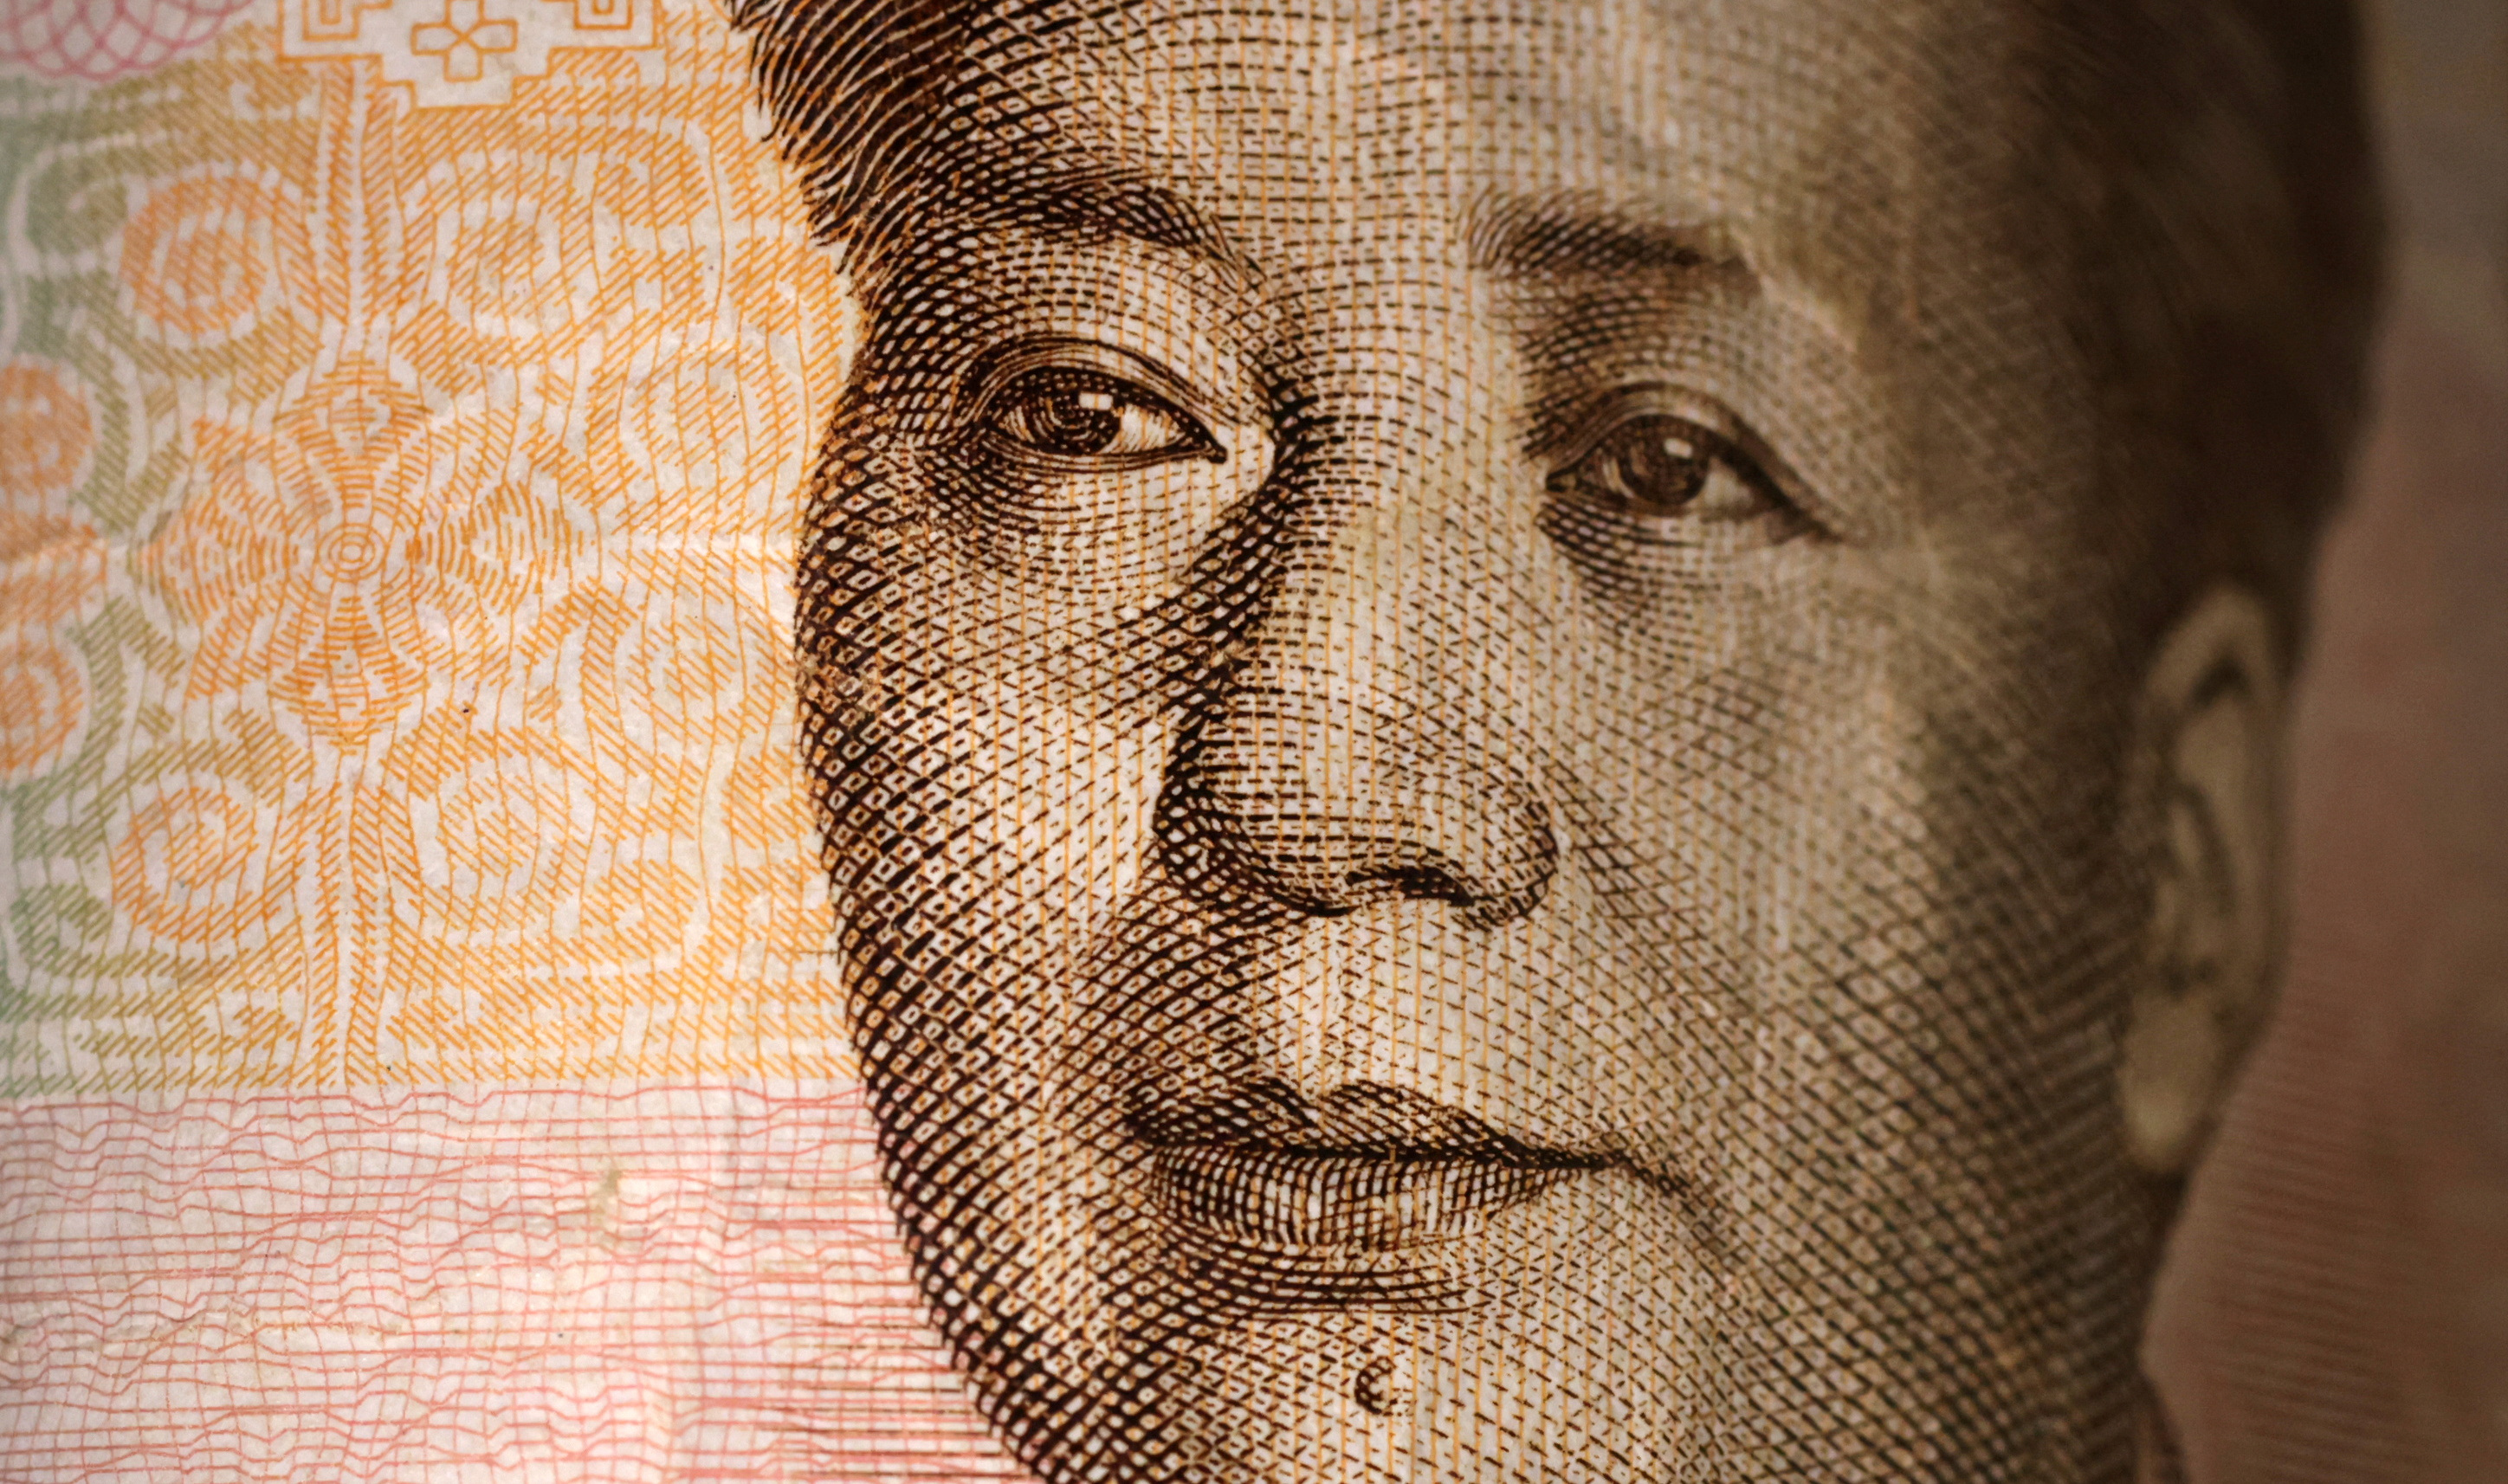 Illustration shows Chinese Yuan banknote